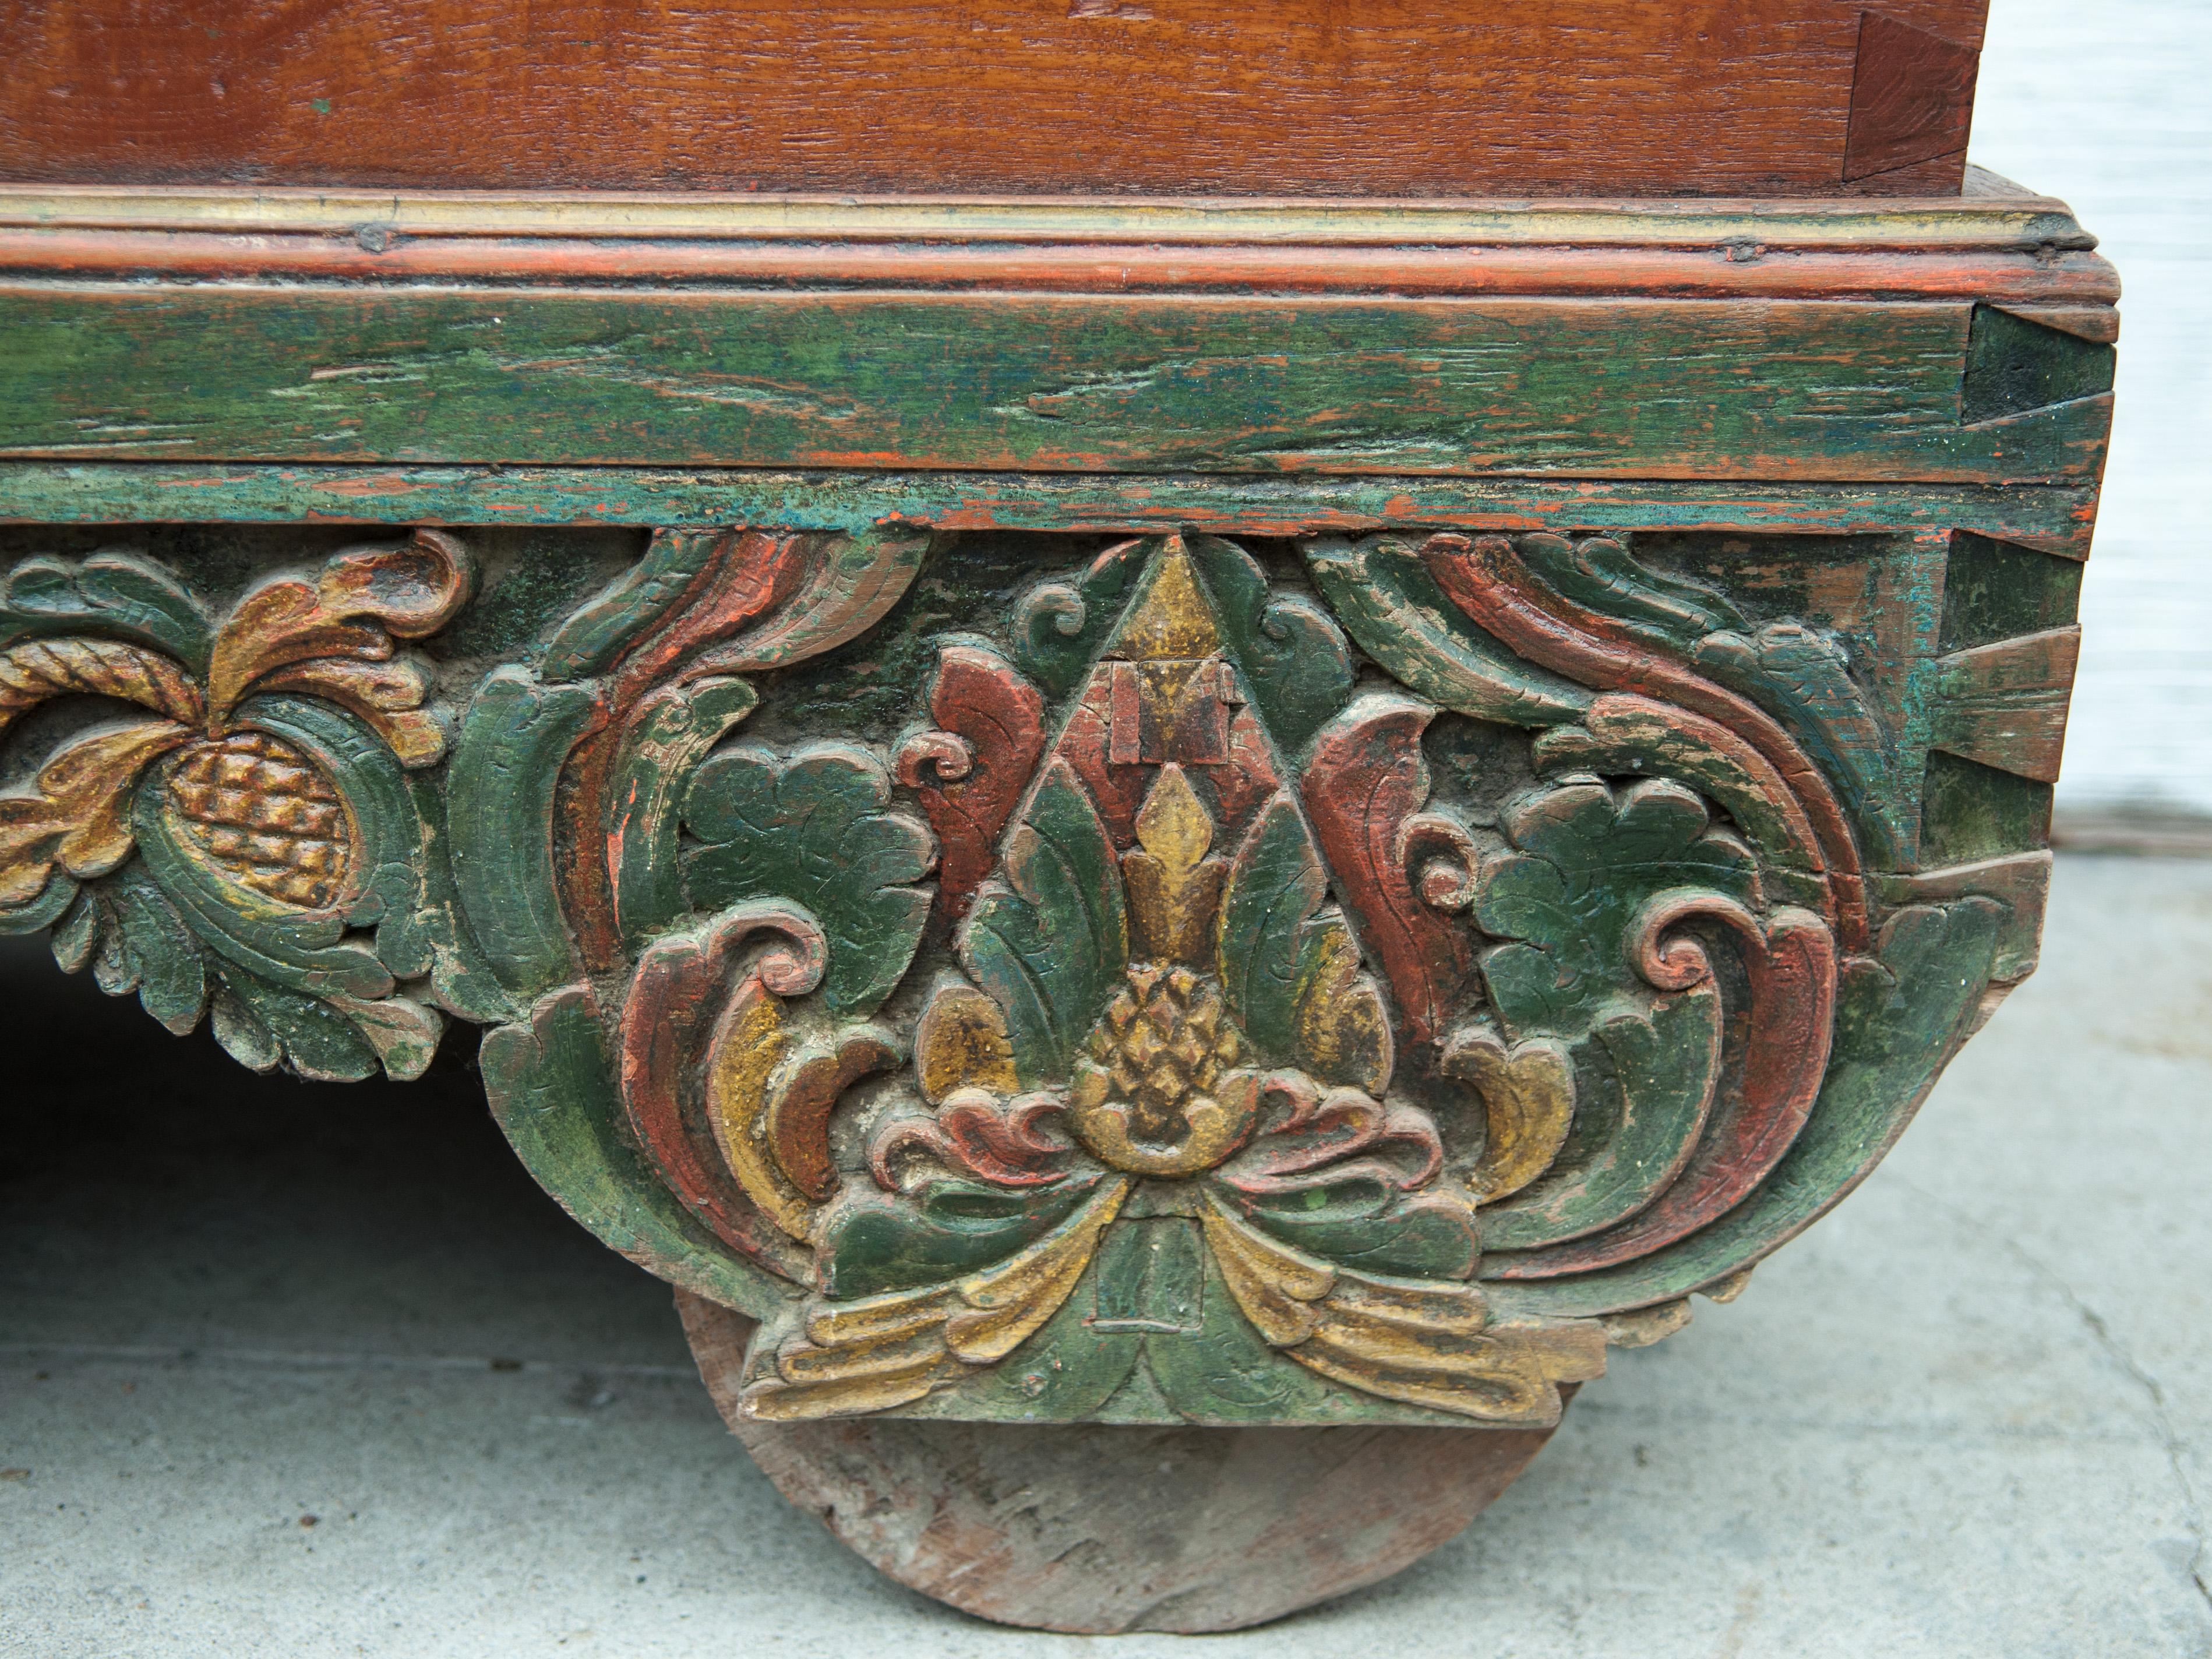 Javanese Mid-20th Century Teak Chest on Wheels from Java. Original Color and Hardware.